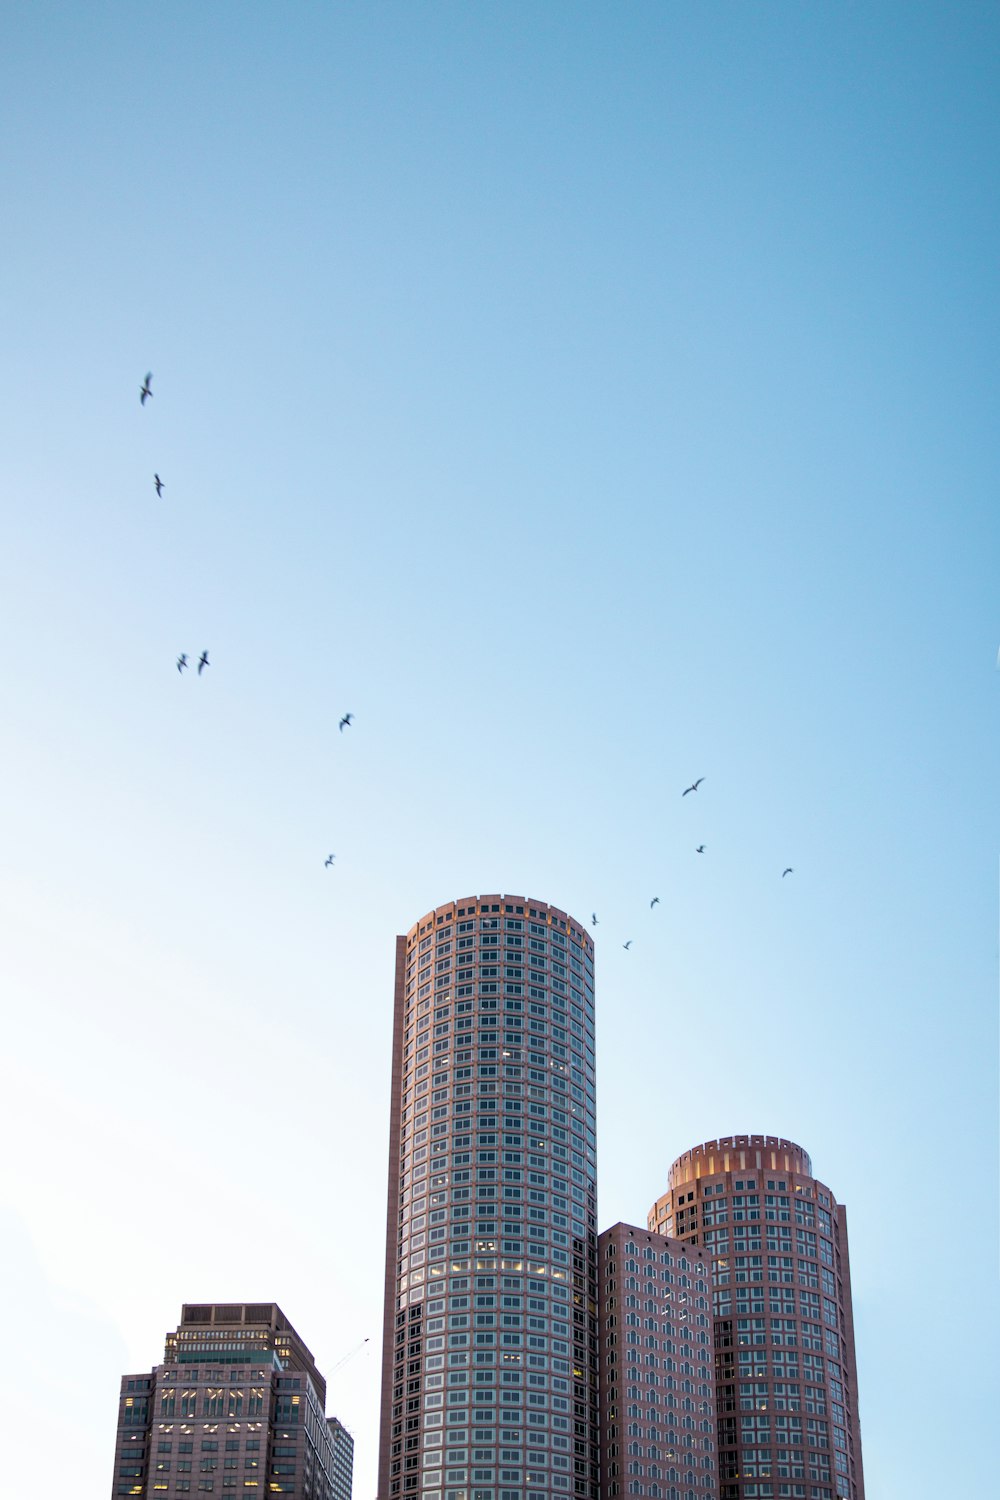 birds flying over high rise building during daytime